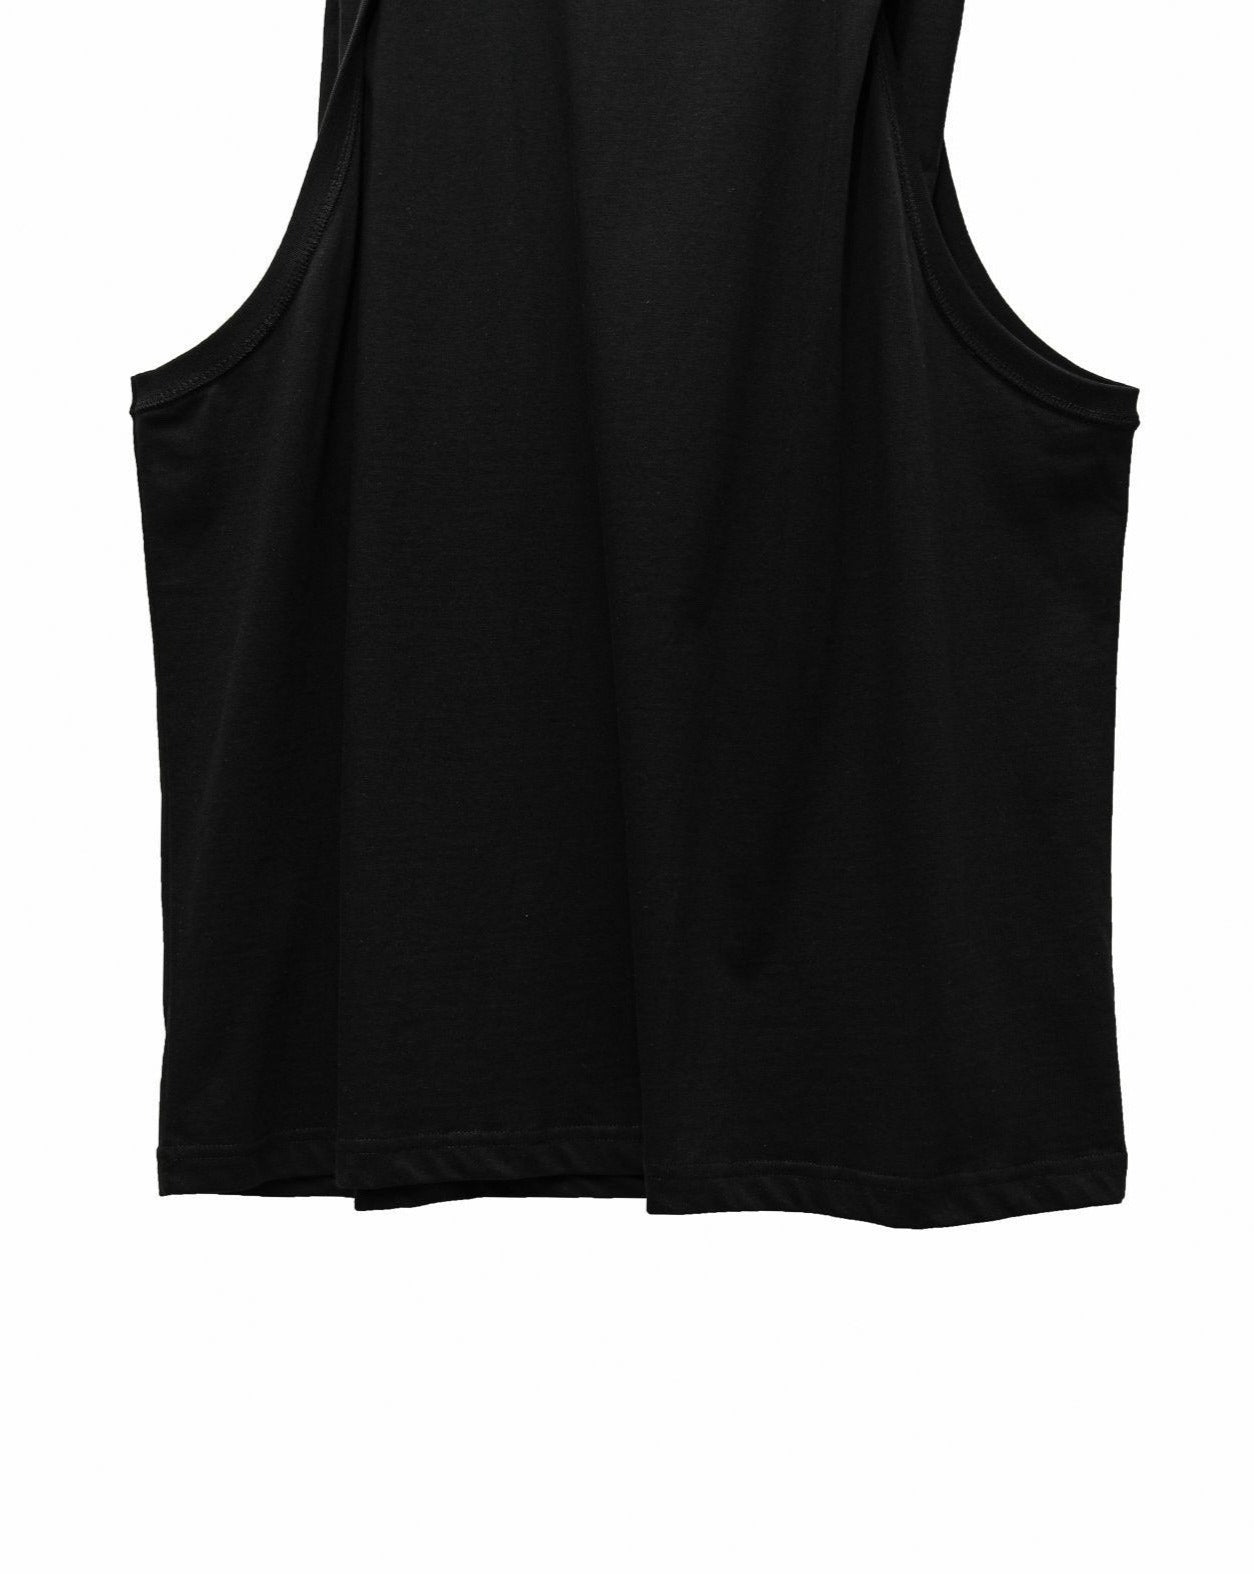 【PAPERMOON 페이퍼 문】SS / Twist Shoulder Strap Oversized Sleeveless Top